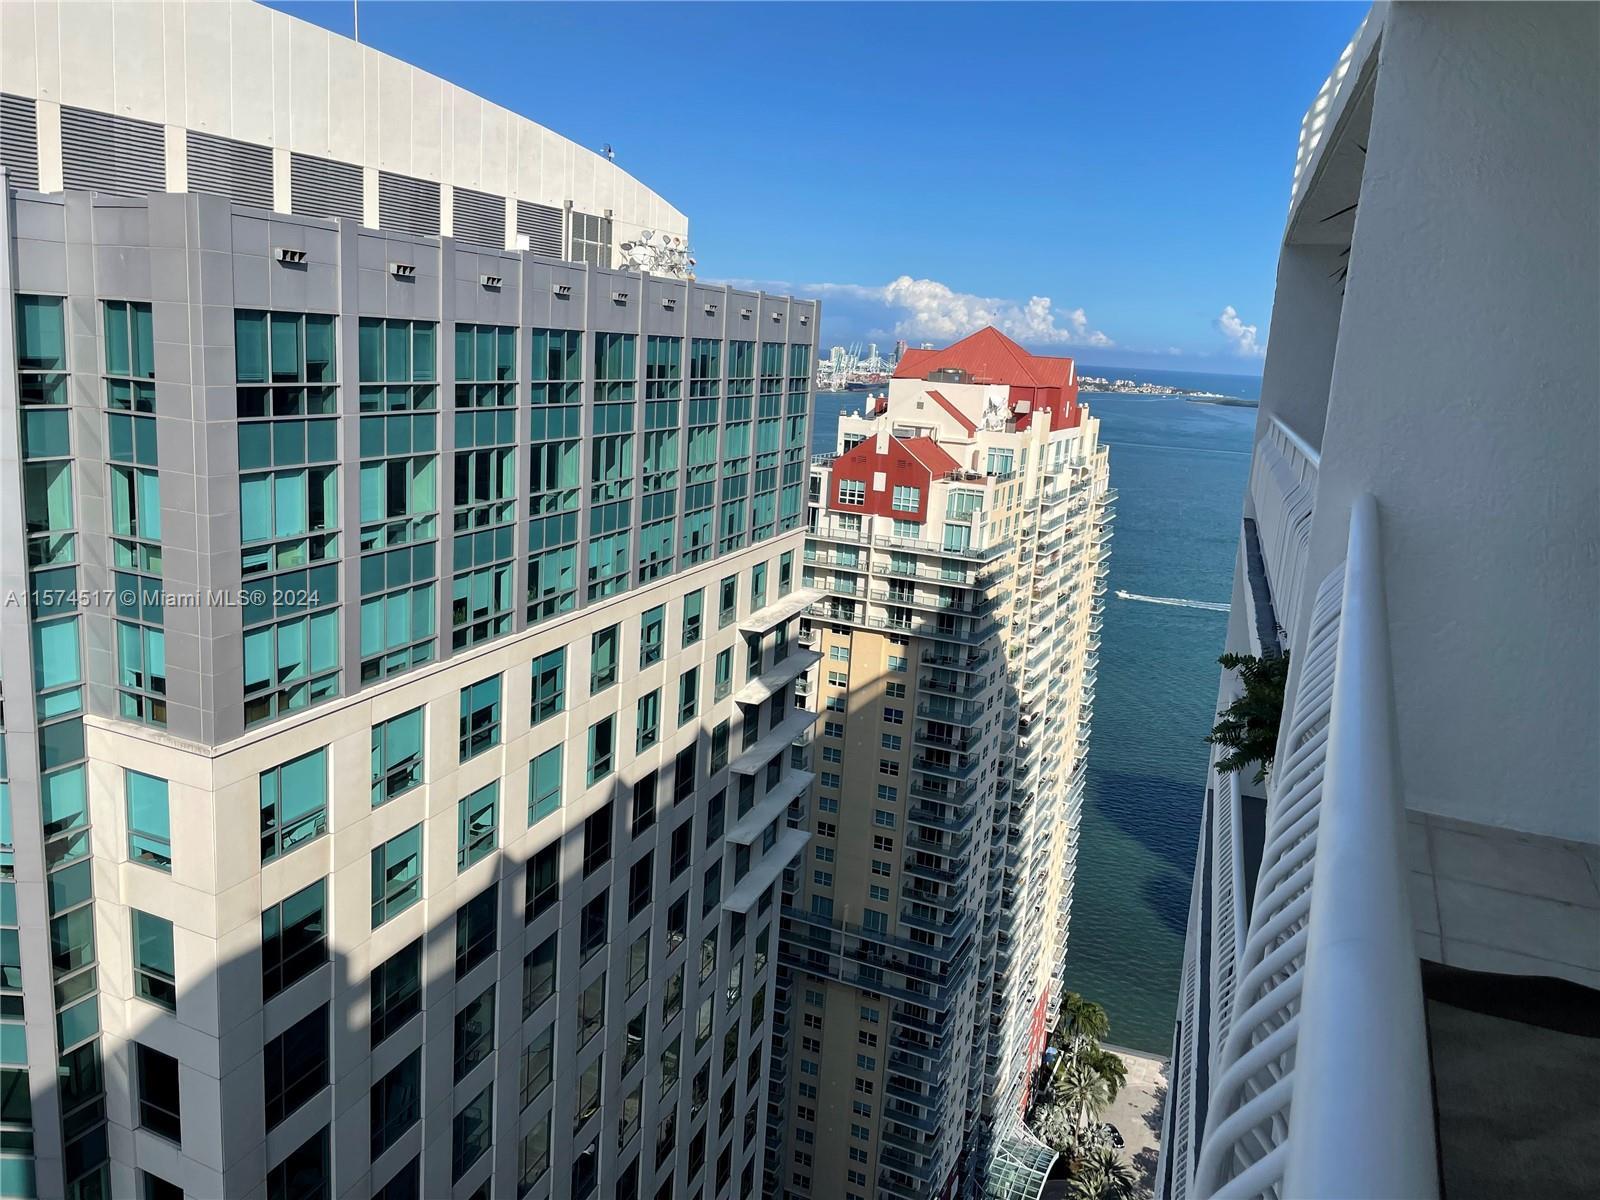 Amazing rental at The Club at Brickell. Conveniently situated, it provides easy access to supermarke